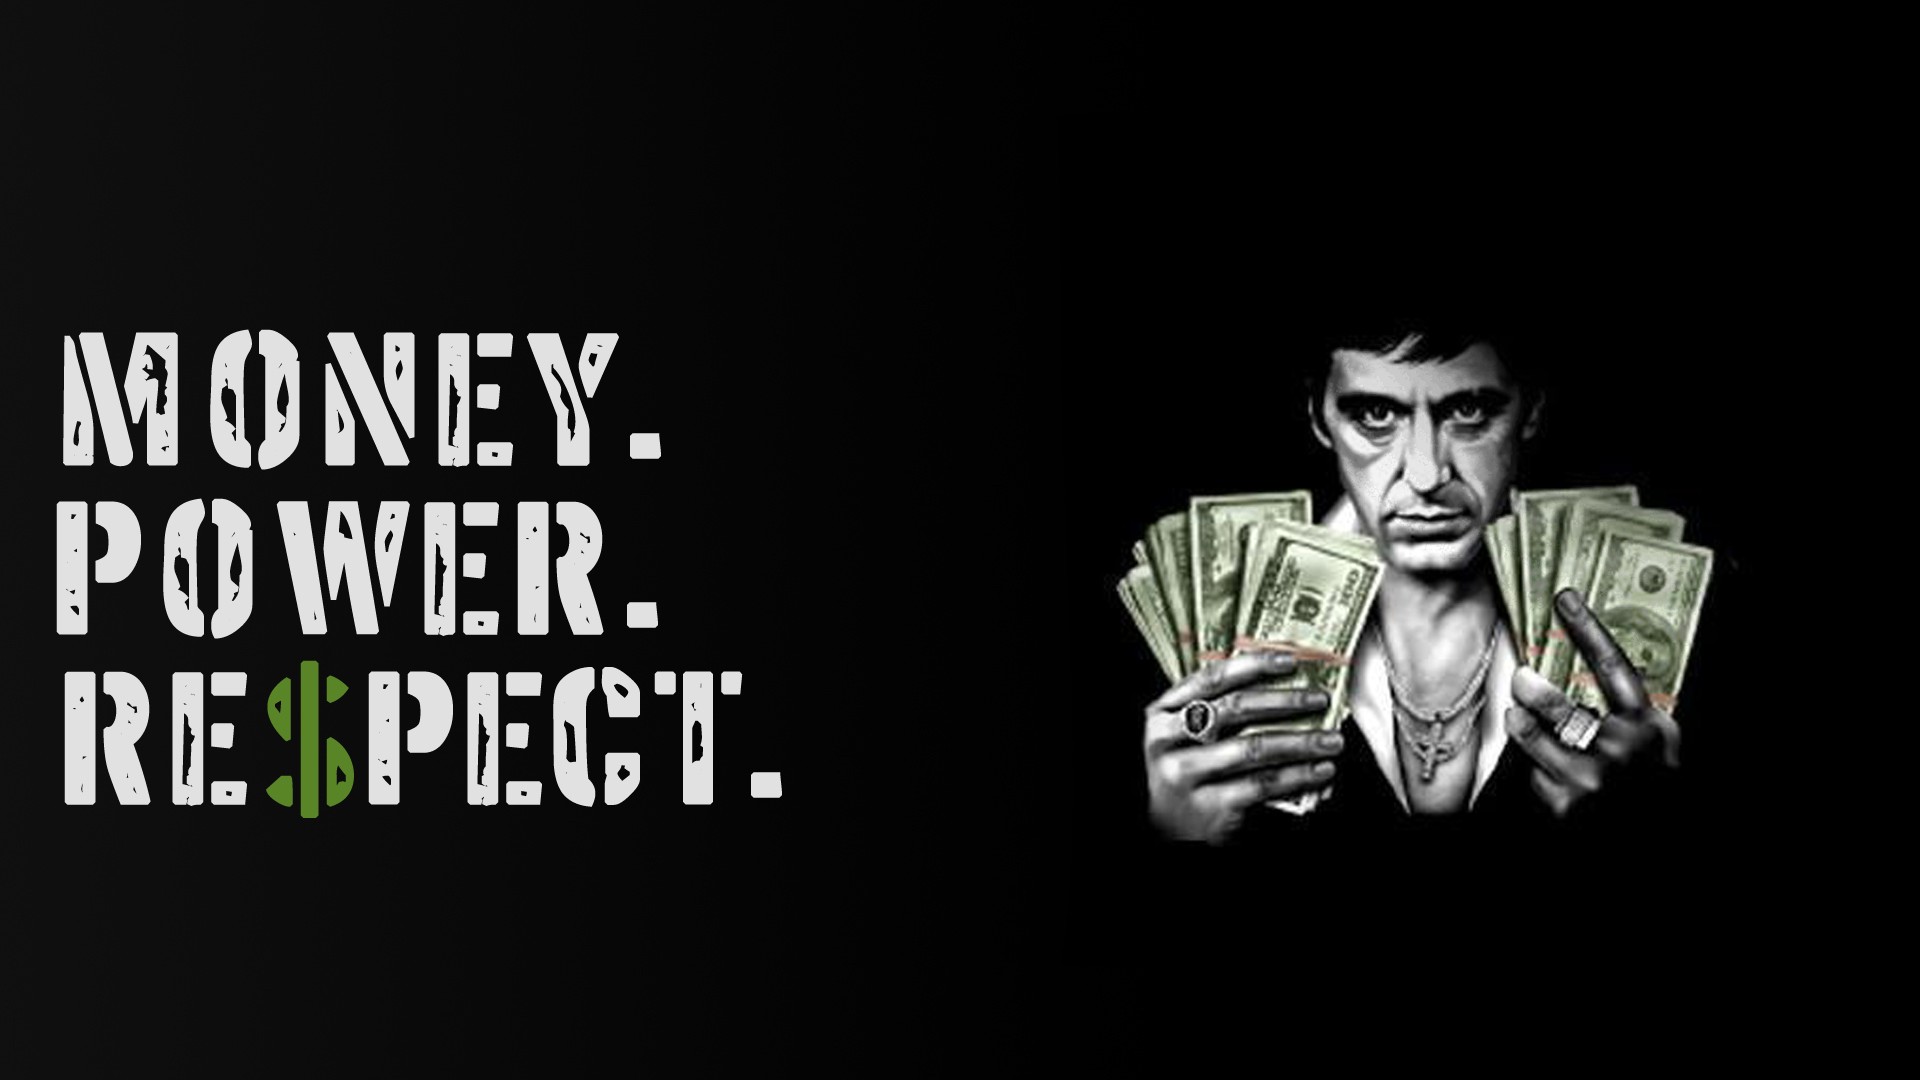 White Money Drugs Quotes Scarface Monochrome Al Pacino Gangster